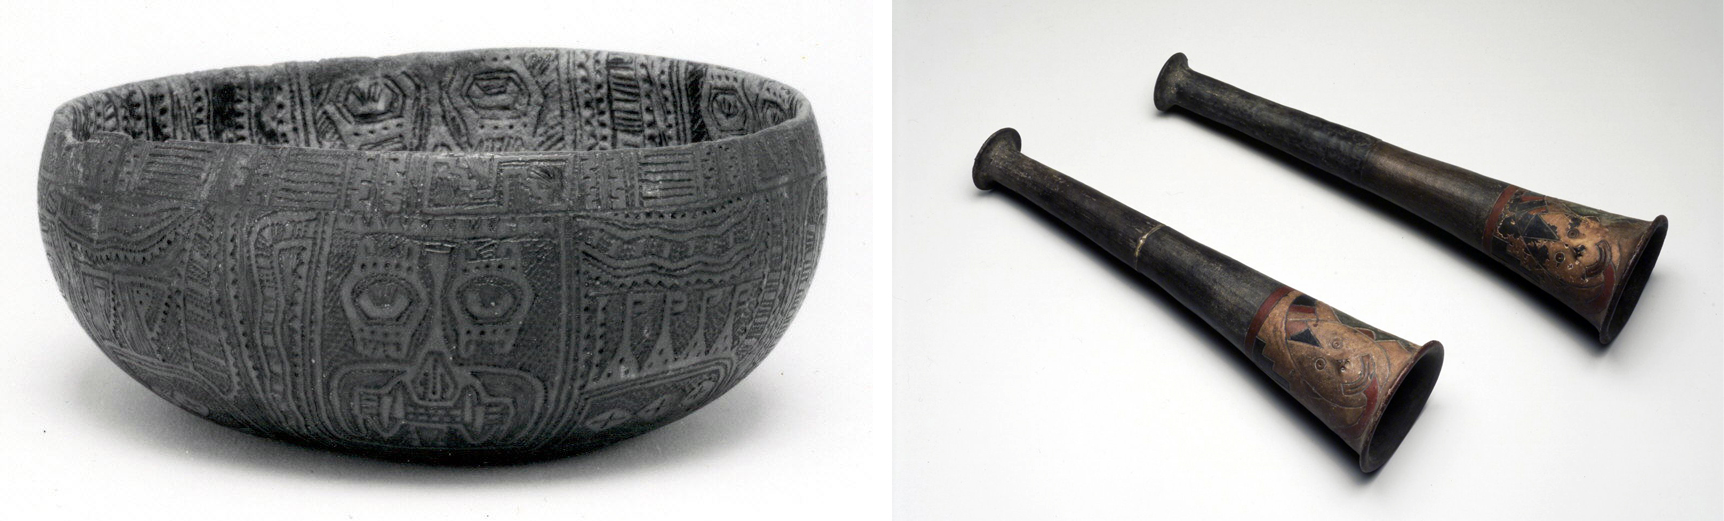 Left: Pyro-engraved gourd bowl, Paracas culture, 5th–4th century B.C.E., 6.4 × 15.2 × 14.6 cm (The Metropolitan Museum of Art); right, Pair of ceramic trumpets with post-fire paint, Paracas culture, 100 B.C.E. - 1 C.E., 29.1 x 7.9 x 7.9 cm and 30.2 x 8.3 x 8.3 cm (Brooklyn Museum) 